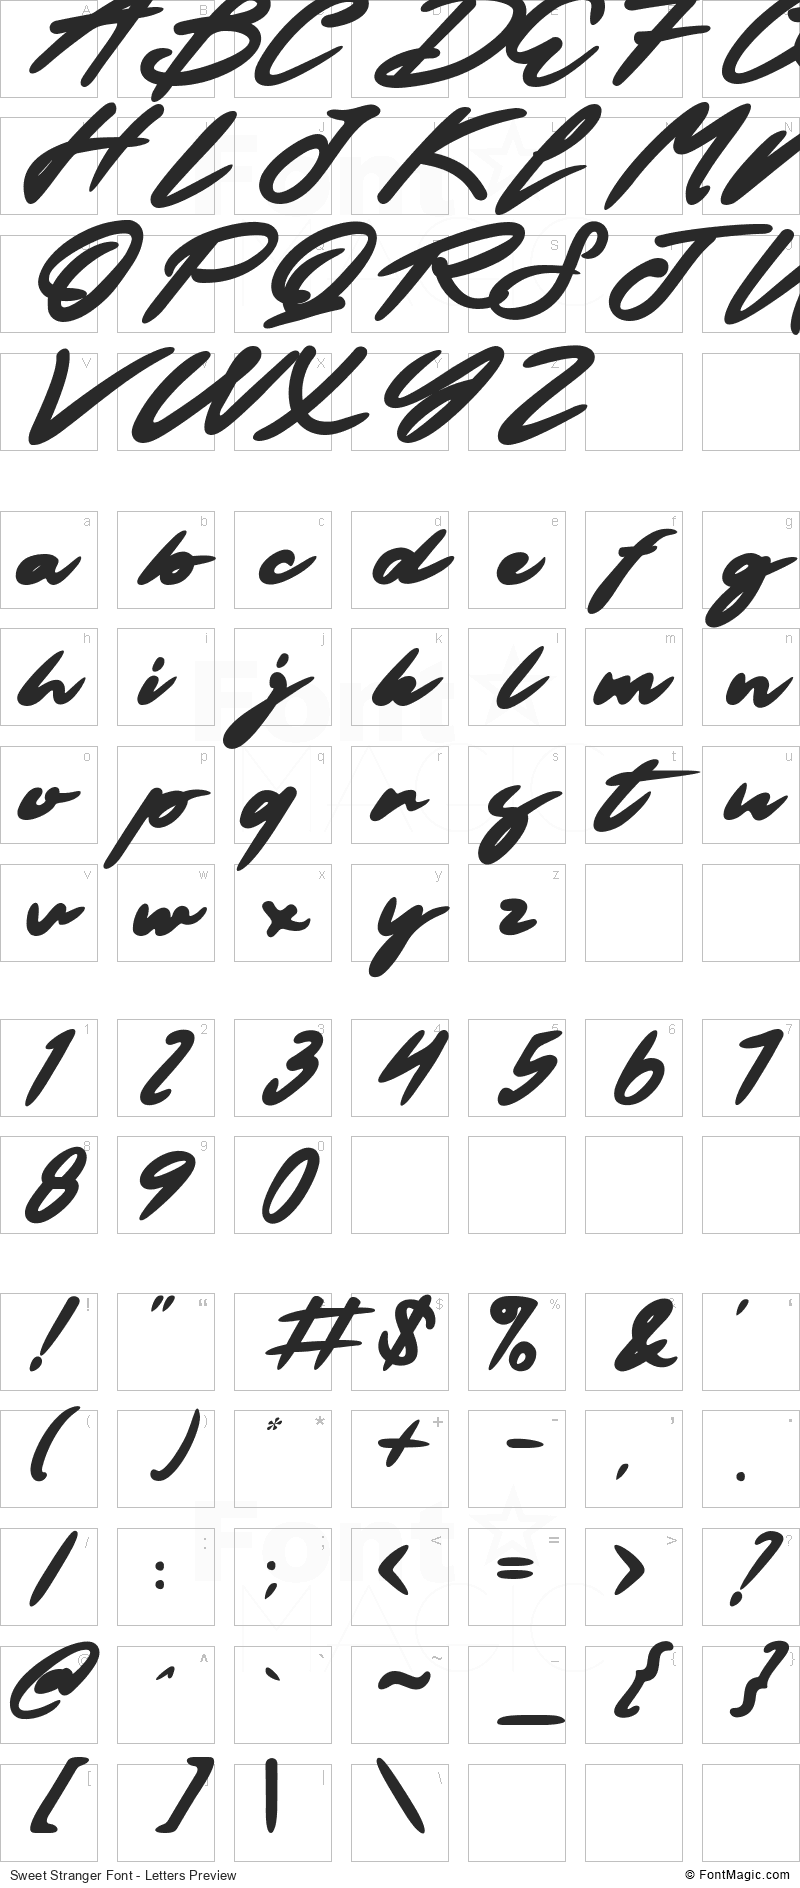 Sweet Stranger Font - All Latters Preview Chart